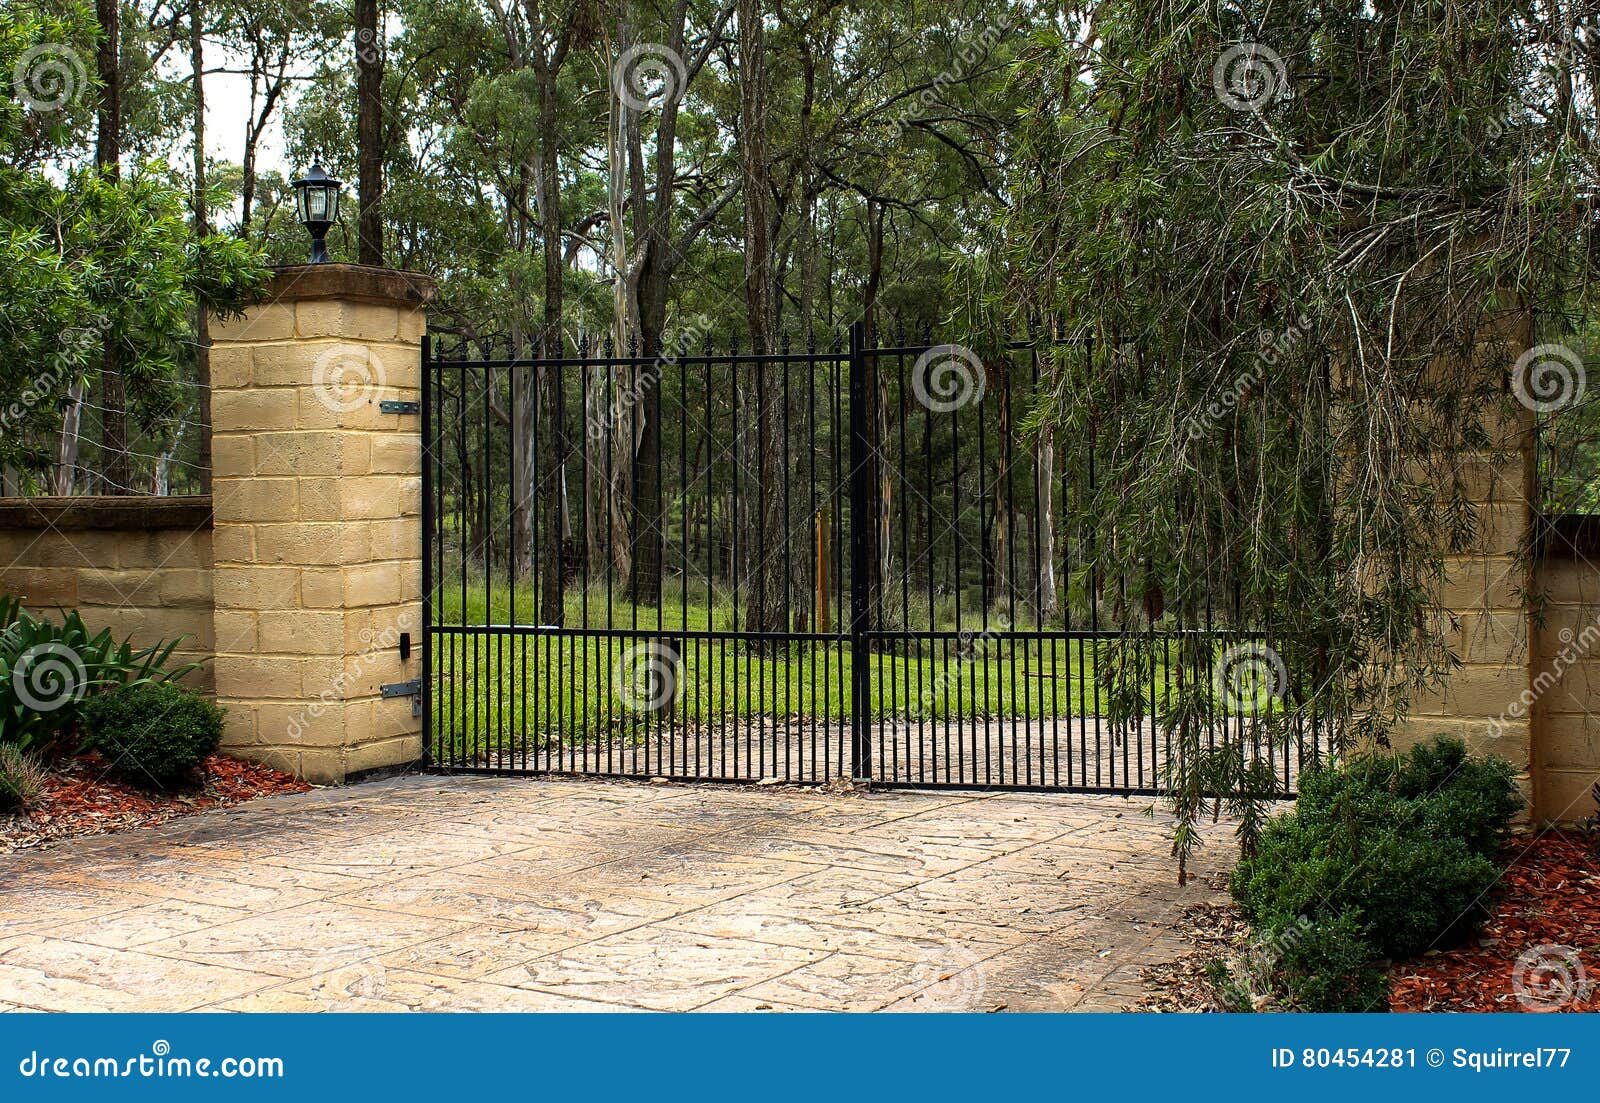 Black Metal Driveway Entrance Gates Set In Brick Fence Stock Image Image Of Black Ornate 80454281,How To Cook A Prime Rib In The Oven